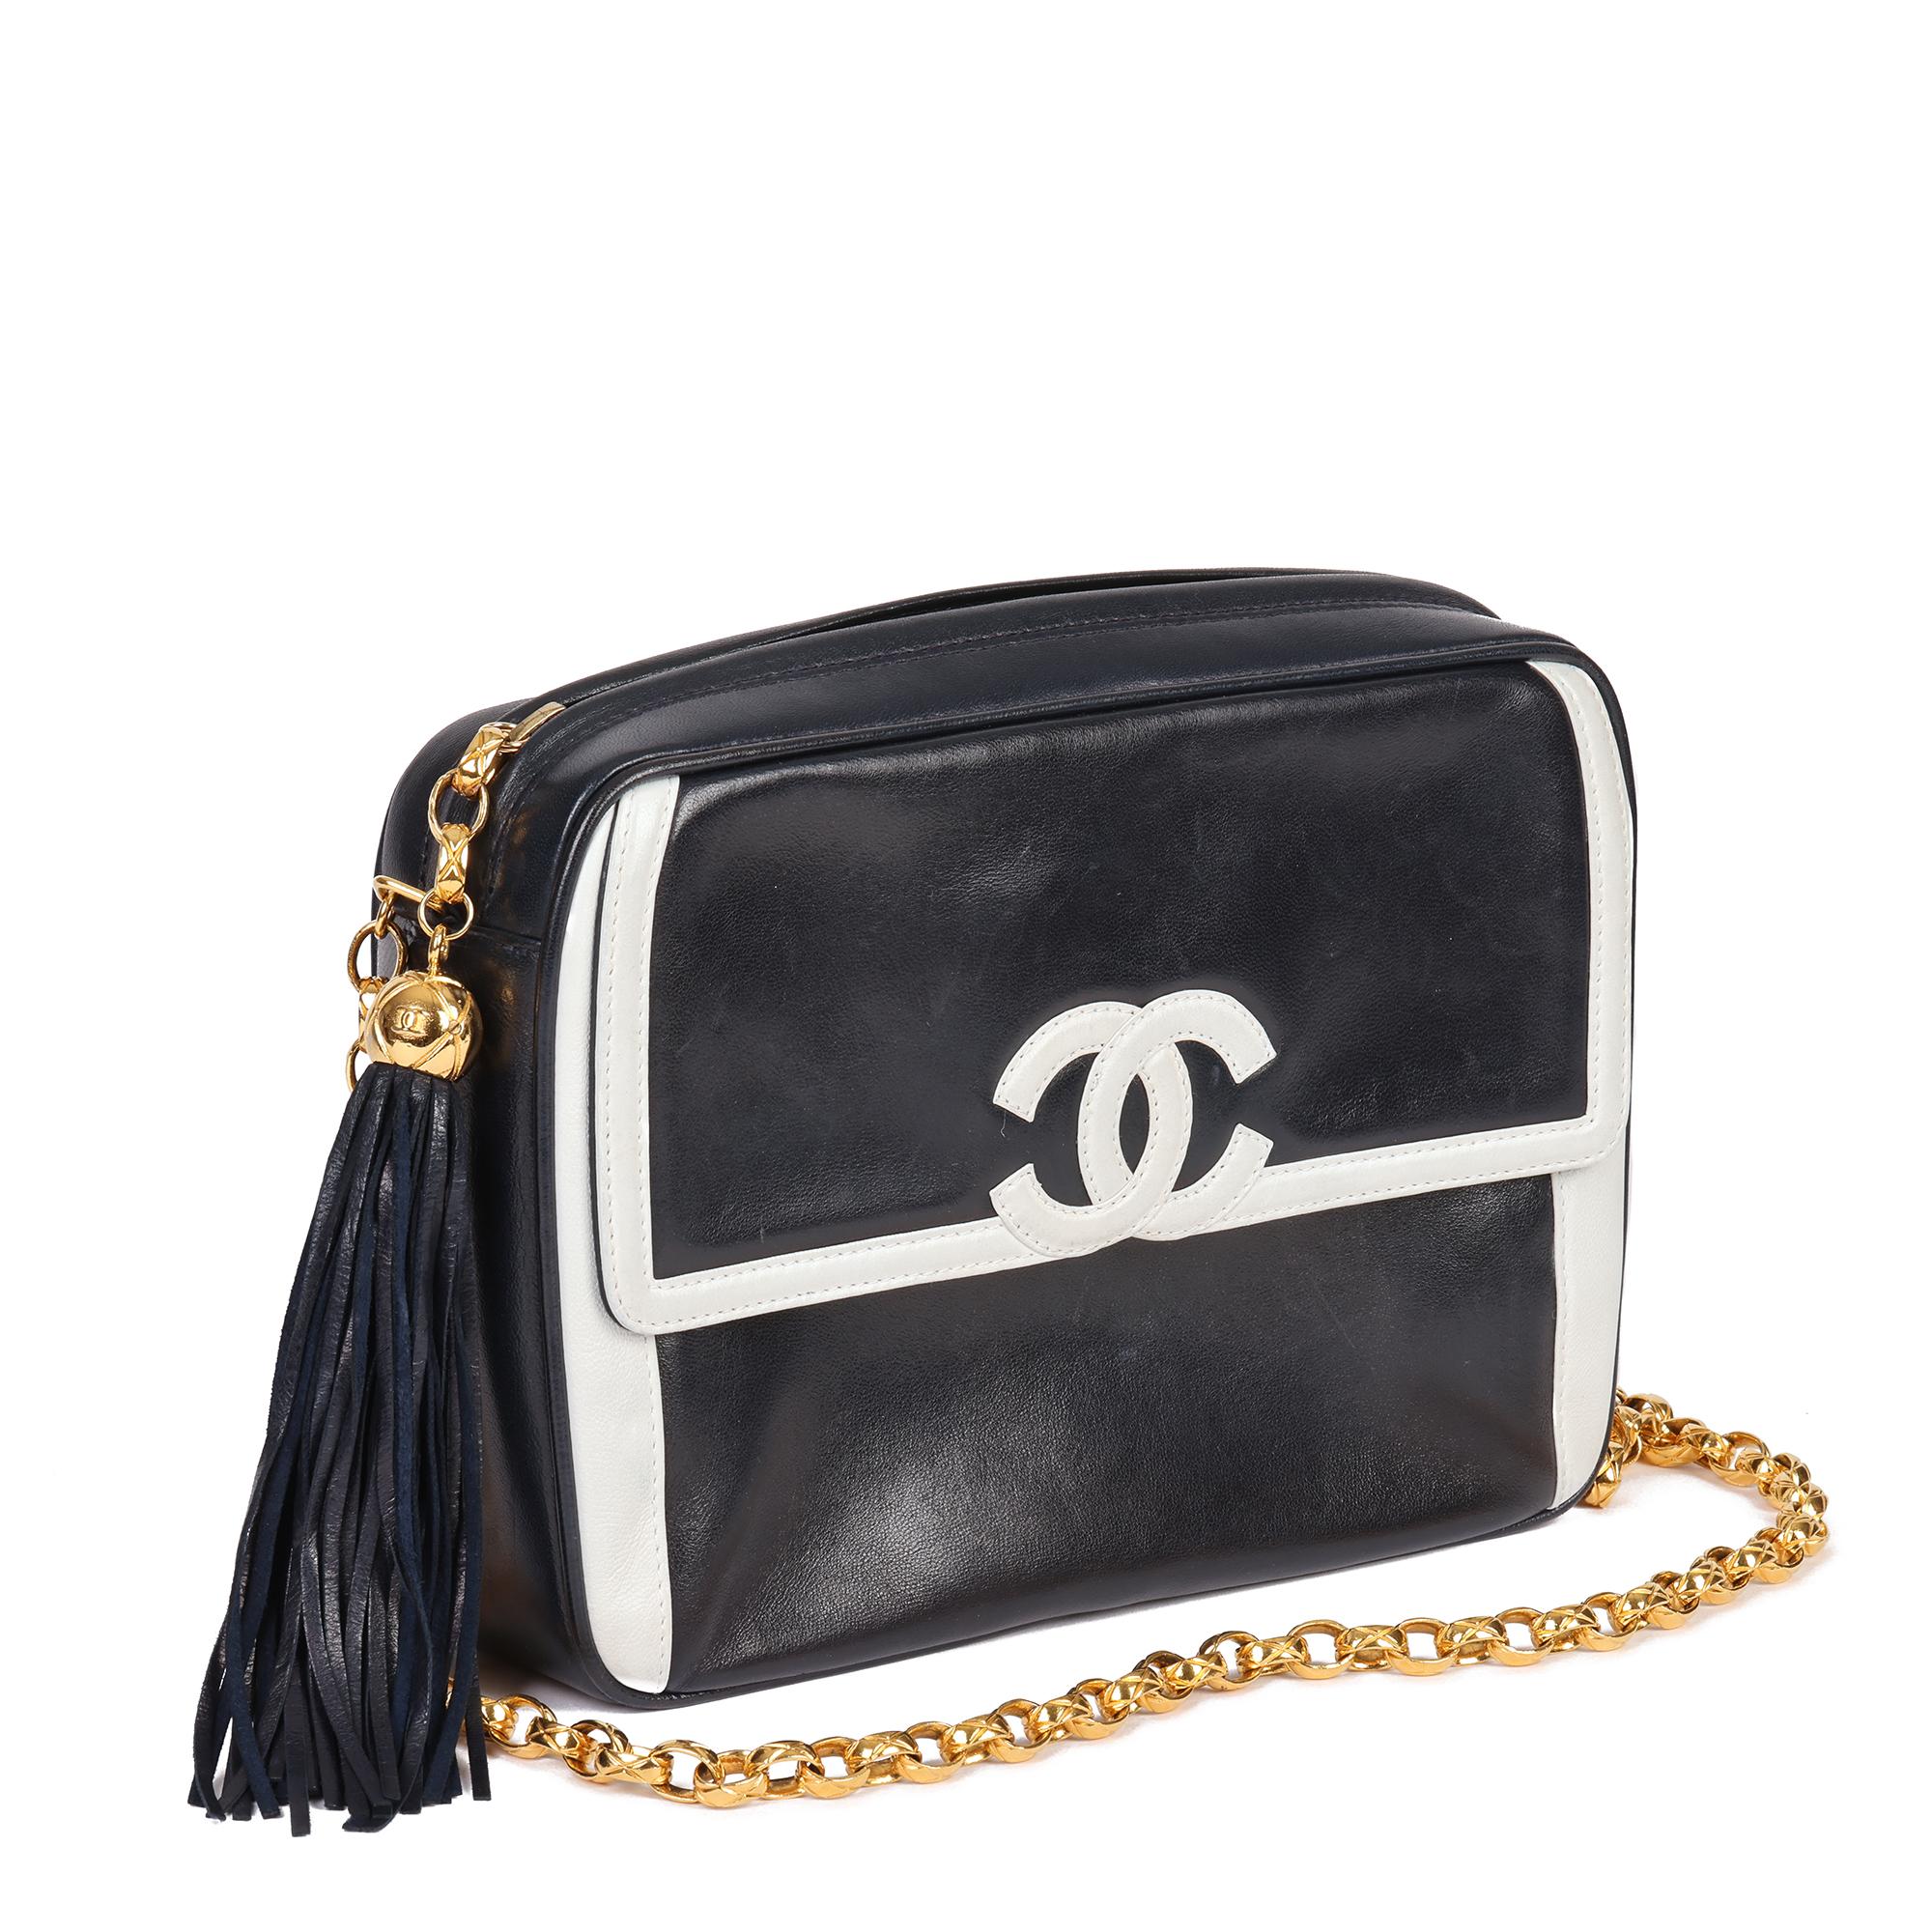 CHANEL
Navy & White Lambskin Vintage Small Timeless Fringe Camera Bag

Xupes Reference: HB4816
Serial Number: 2665417
Age (Circa): 1992
Accompanied By: Chanel Dust Bag, Authenticity Card
Authenticity Details: Authenticity Card, Serial Sticker (Made